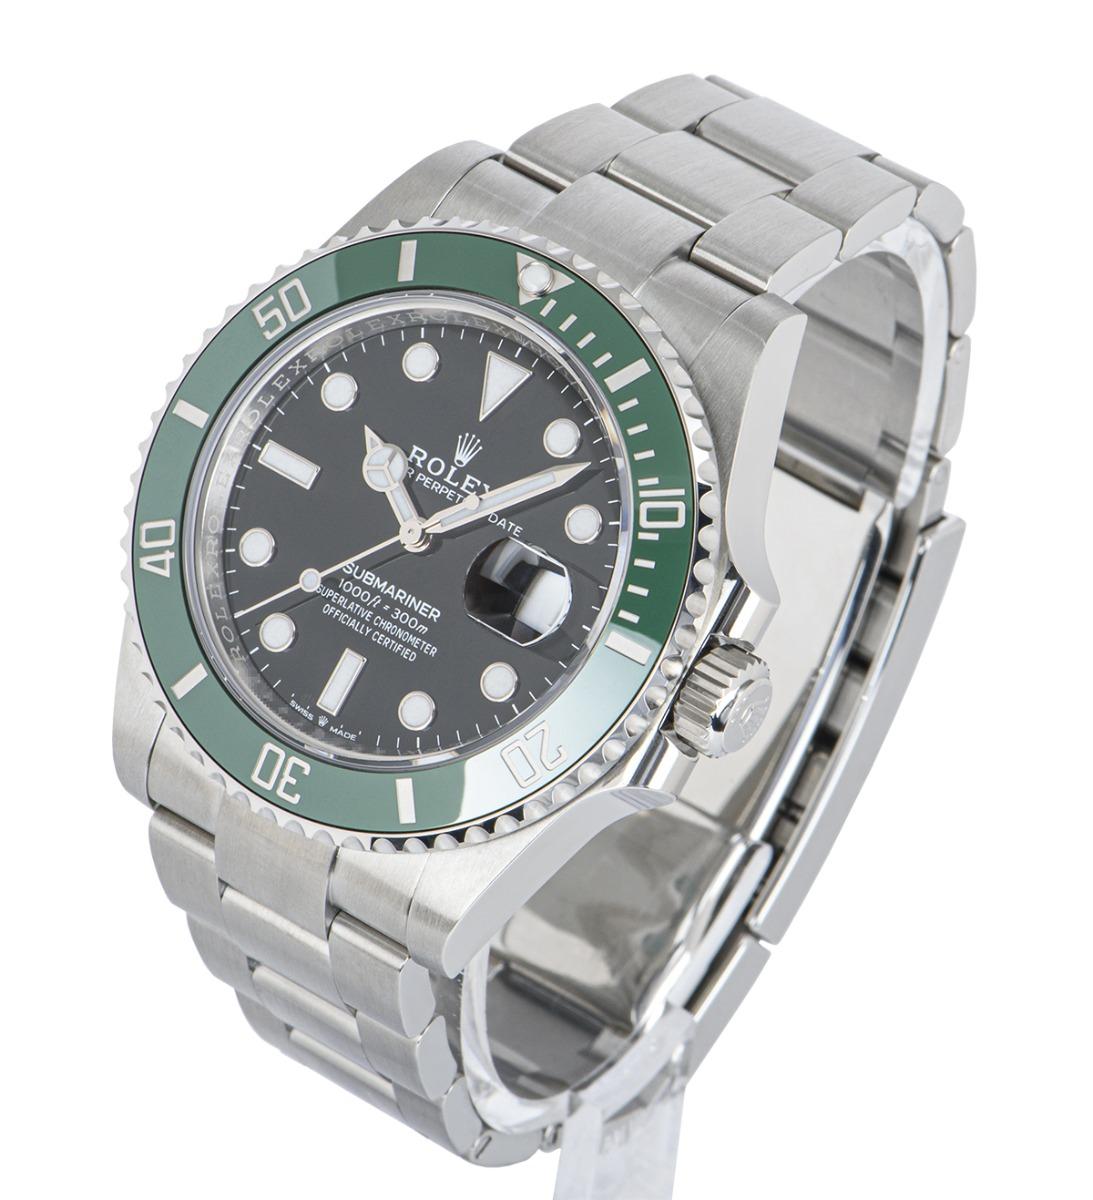 An unworn 41mm Submariner Date known as both a Kermit or Starbucks, from Rolex in Oystersteel. Features a black dial with the date at 3 o'clock and a green unidirectional rotatable bezel with 60-minute graduations coated in platinum.

The Oyster